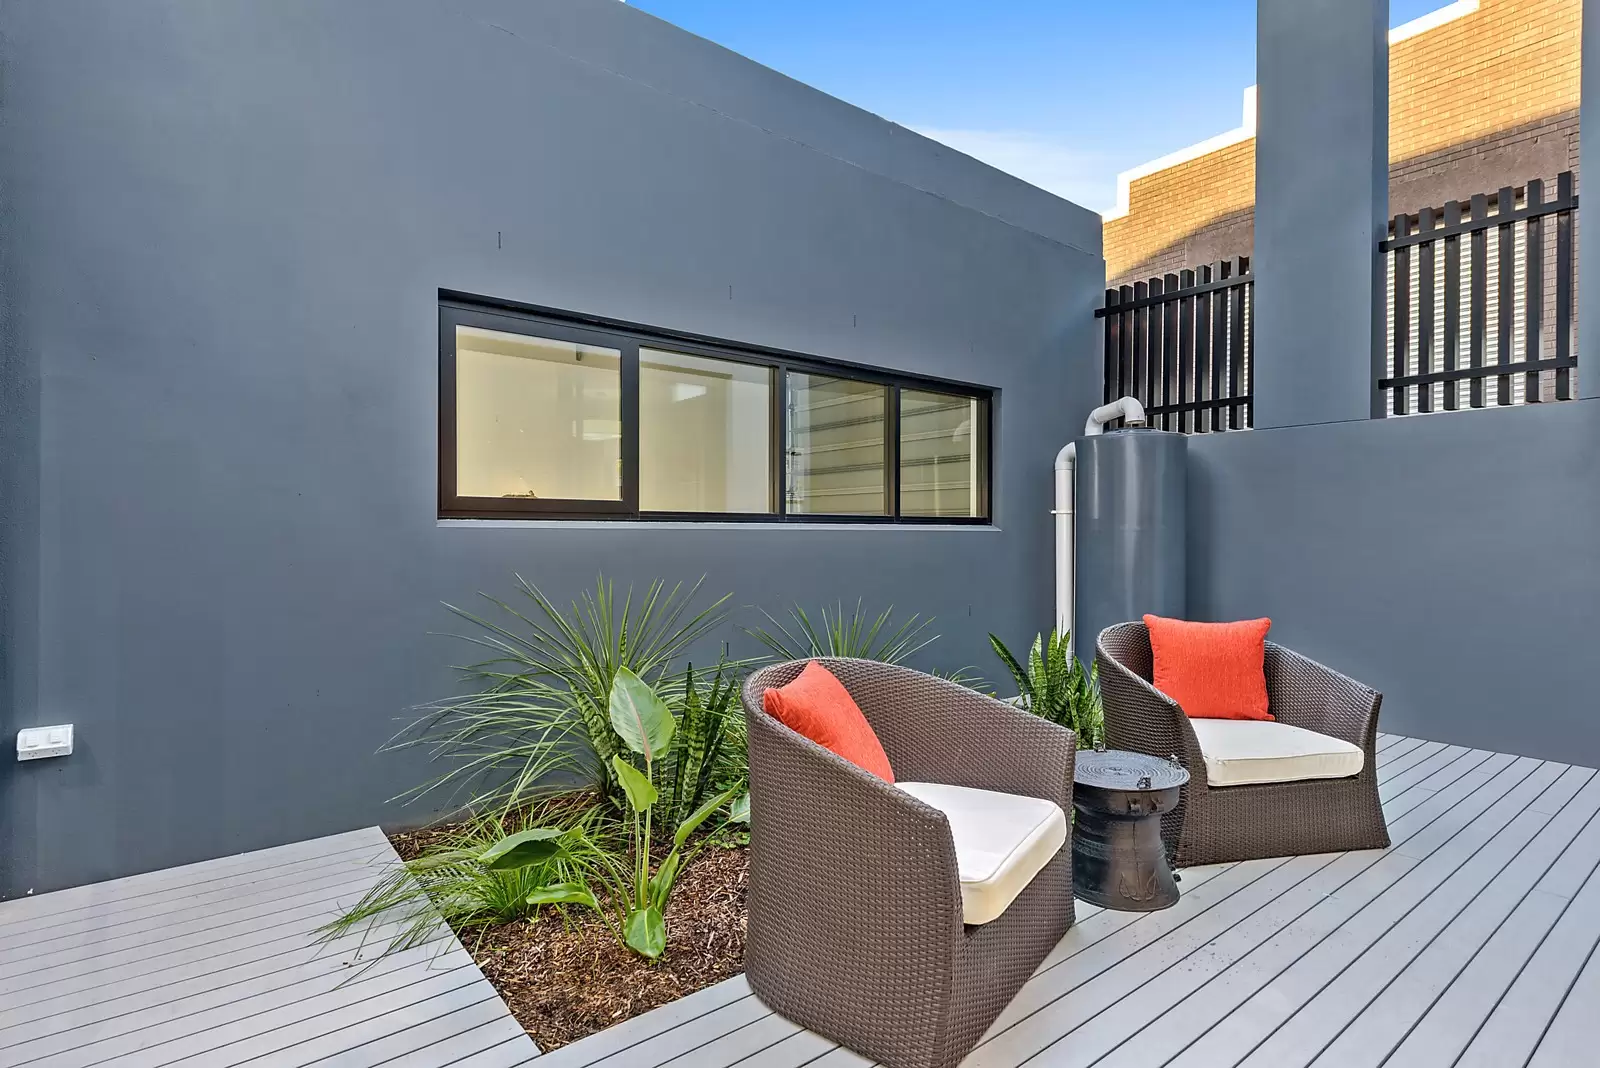 Photo #7: 6D Queen Street, Rosebery - Sold by Sydney Sotheby's International Realty